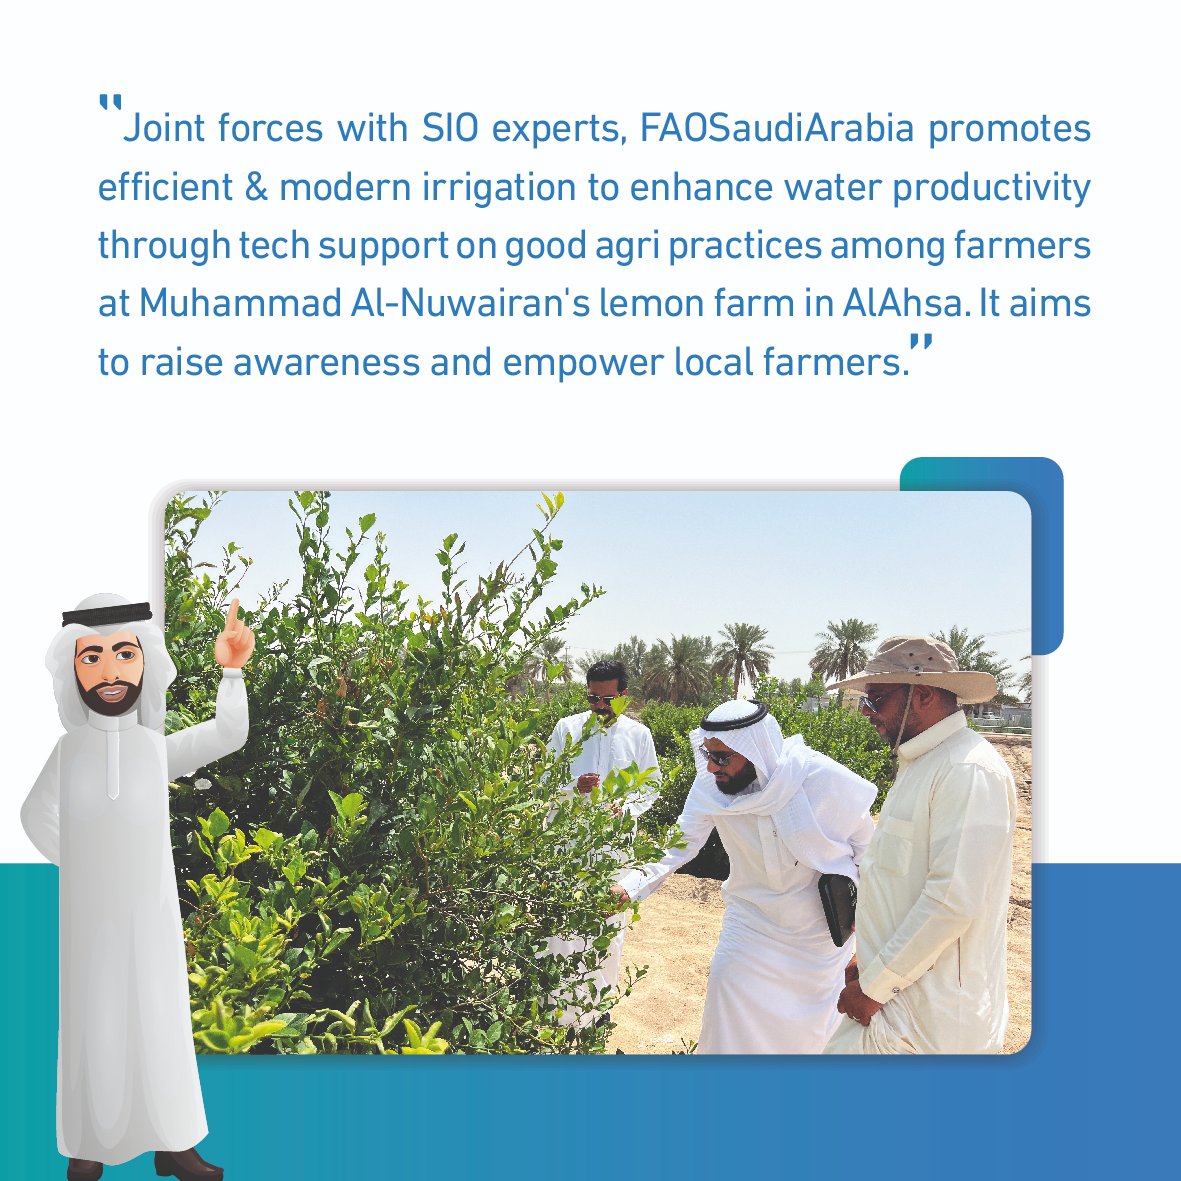 With @SIO experts, @FAOSaudiArabia promotes efficient and modern #irrigation to enhance water productivity through good agri practices among farmers at Muhammad Al-Nuwairan's lemon farm in #AlAhsa. It aims to raise awareness and empower local farmers. #WaterForSharedProsperity